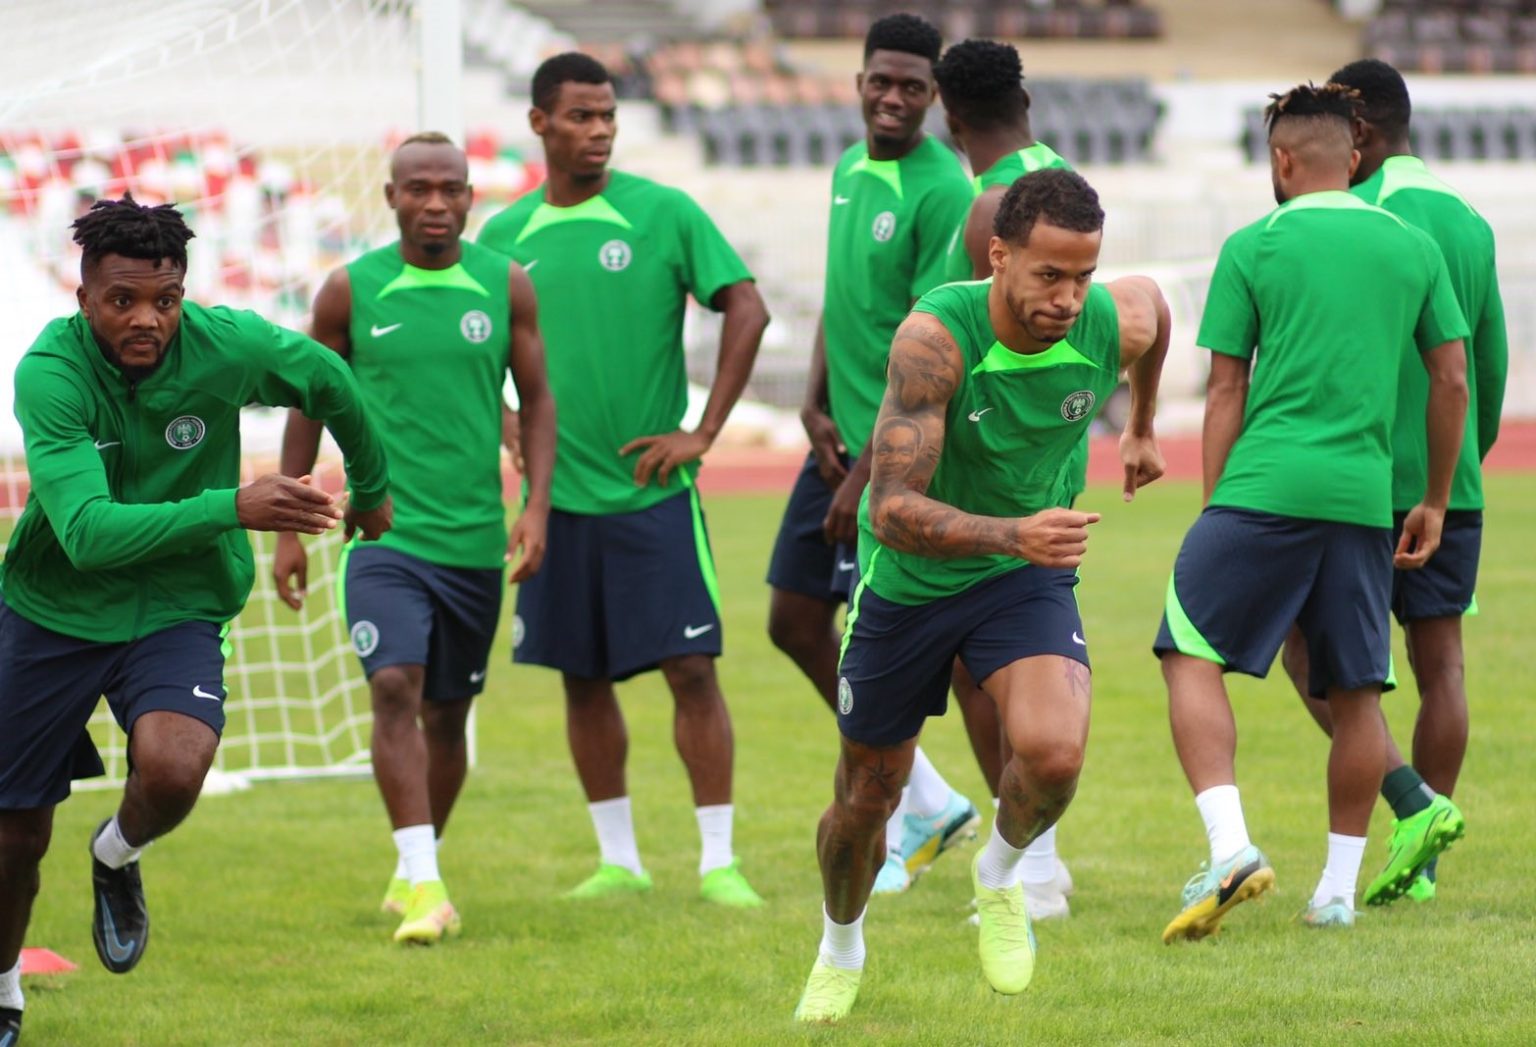 AFCON 2023: Super Eagles camp opens in Abu Dhabi today